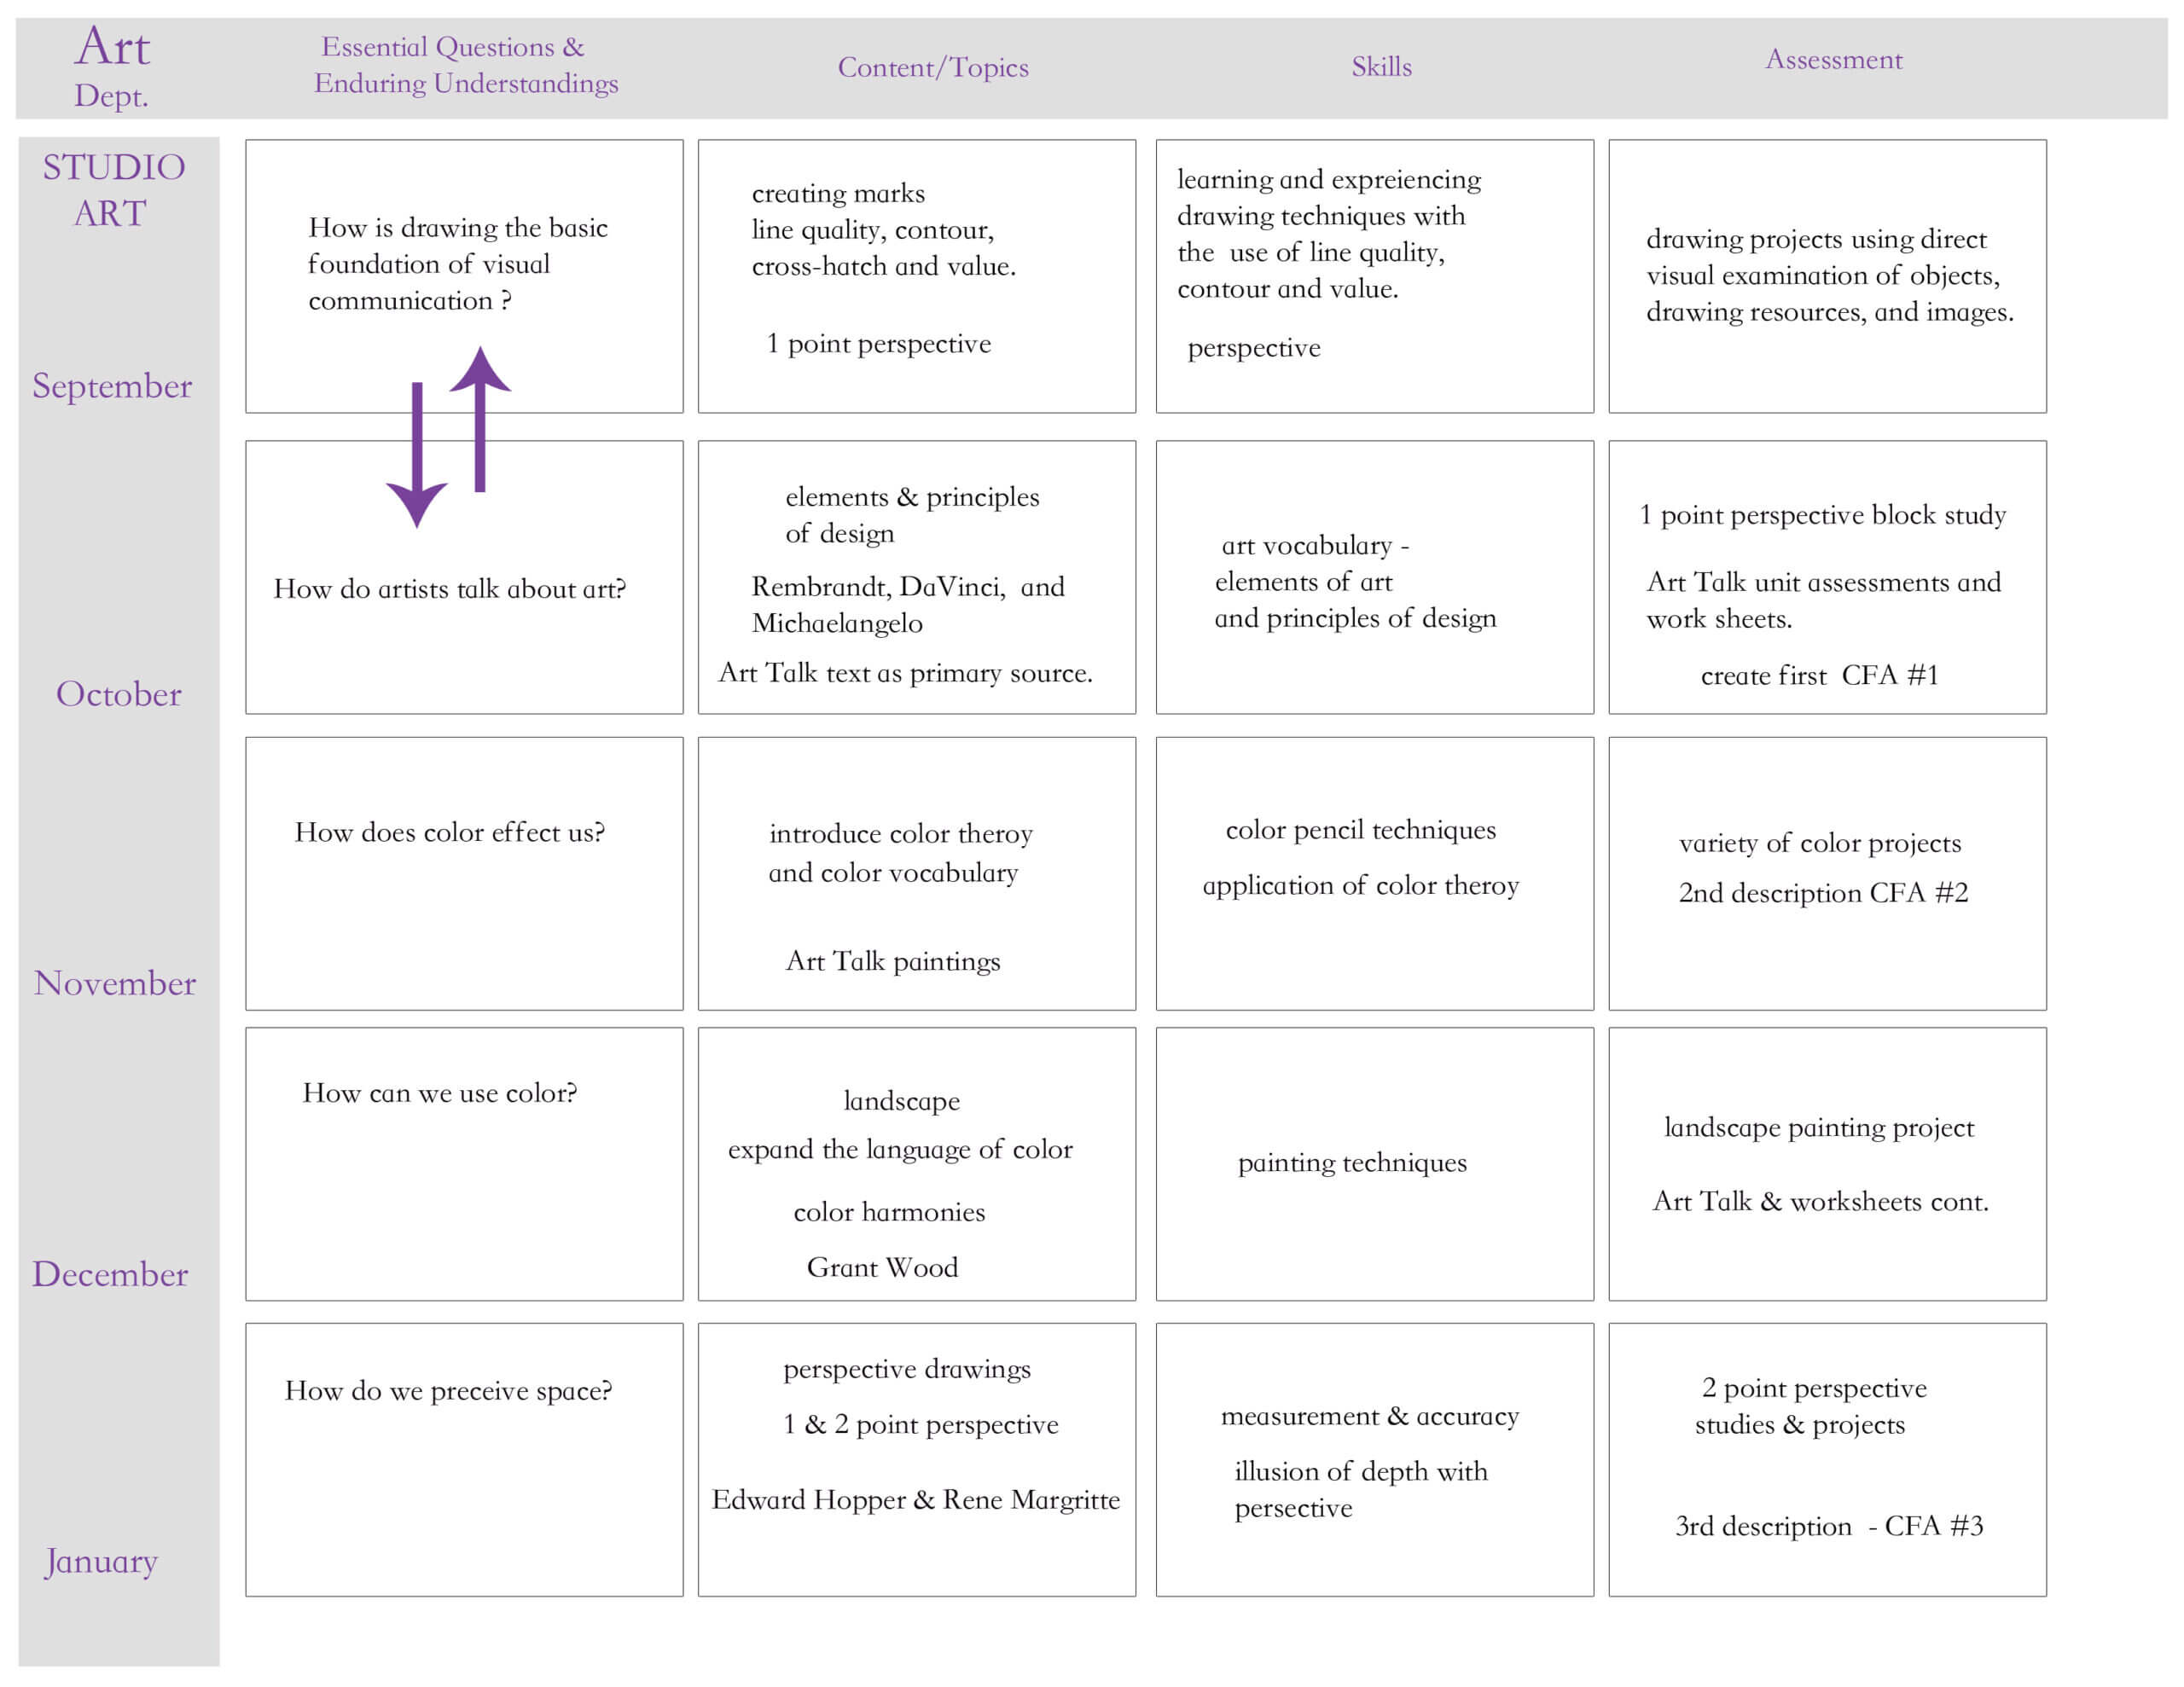 25 Images Of Curriculum Mapping Template For Training Regarding Blank Curriculum Map Template